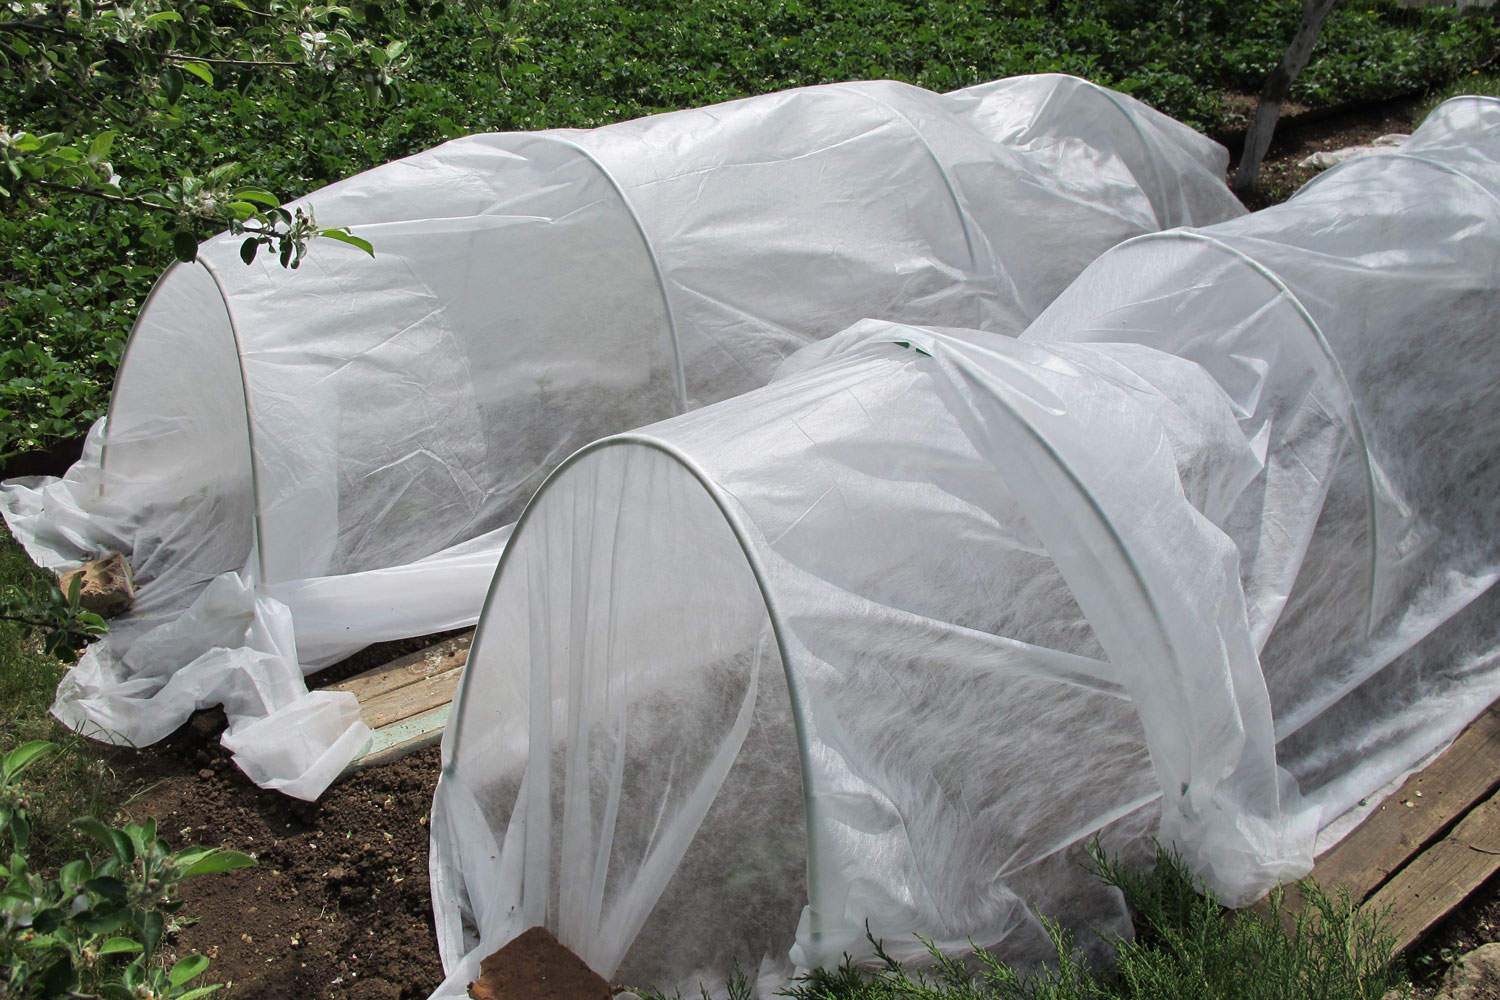 Winter proofing garden with plastic covers 